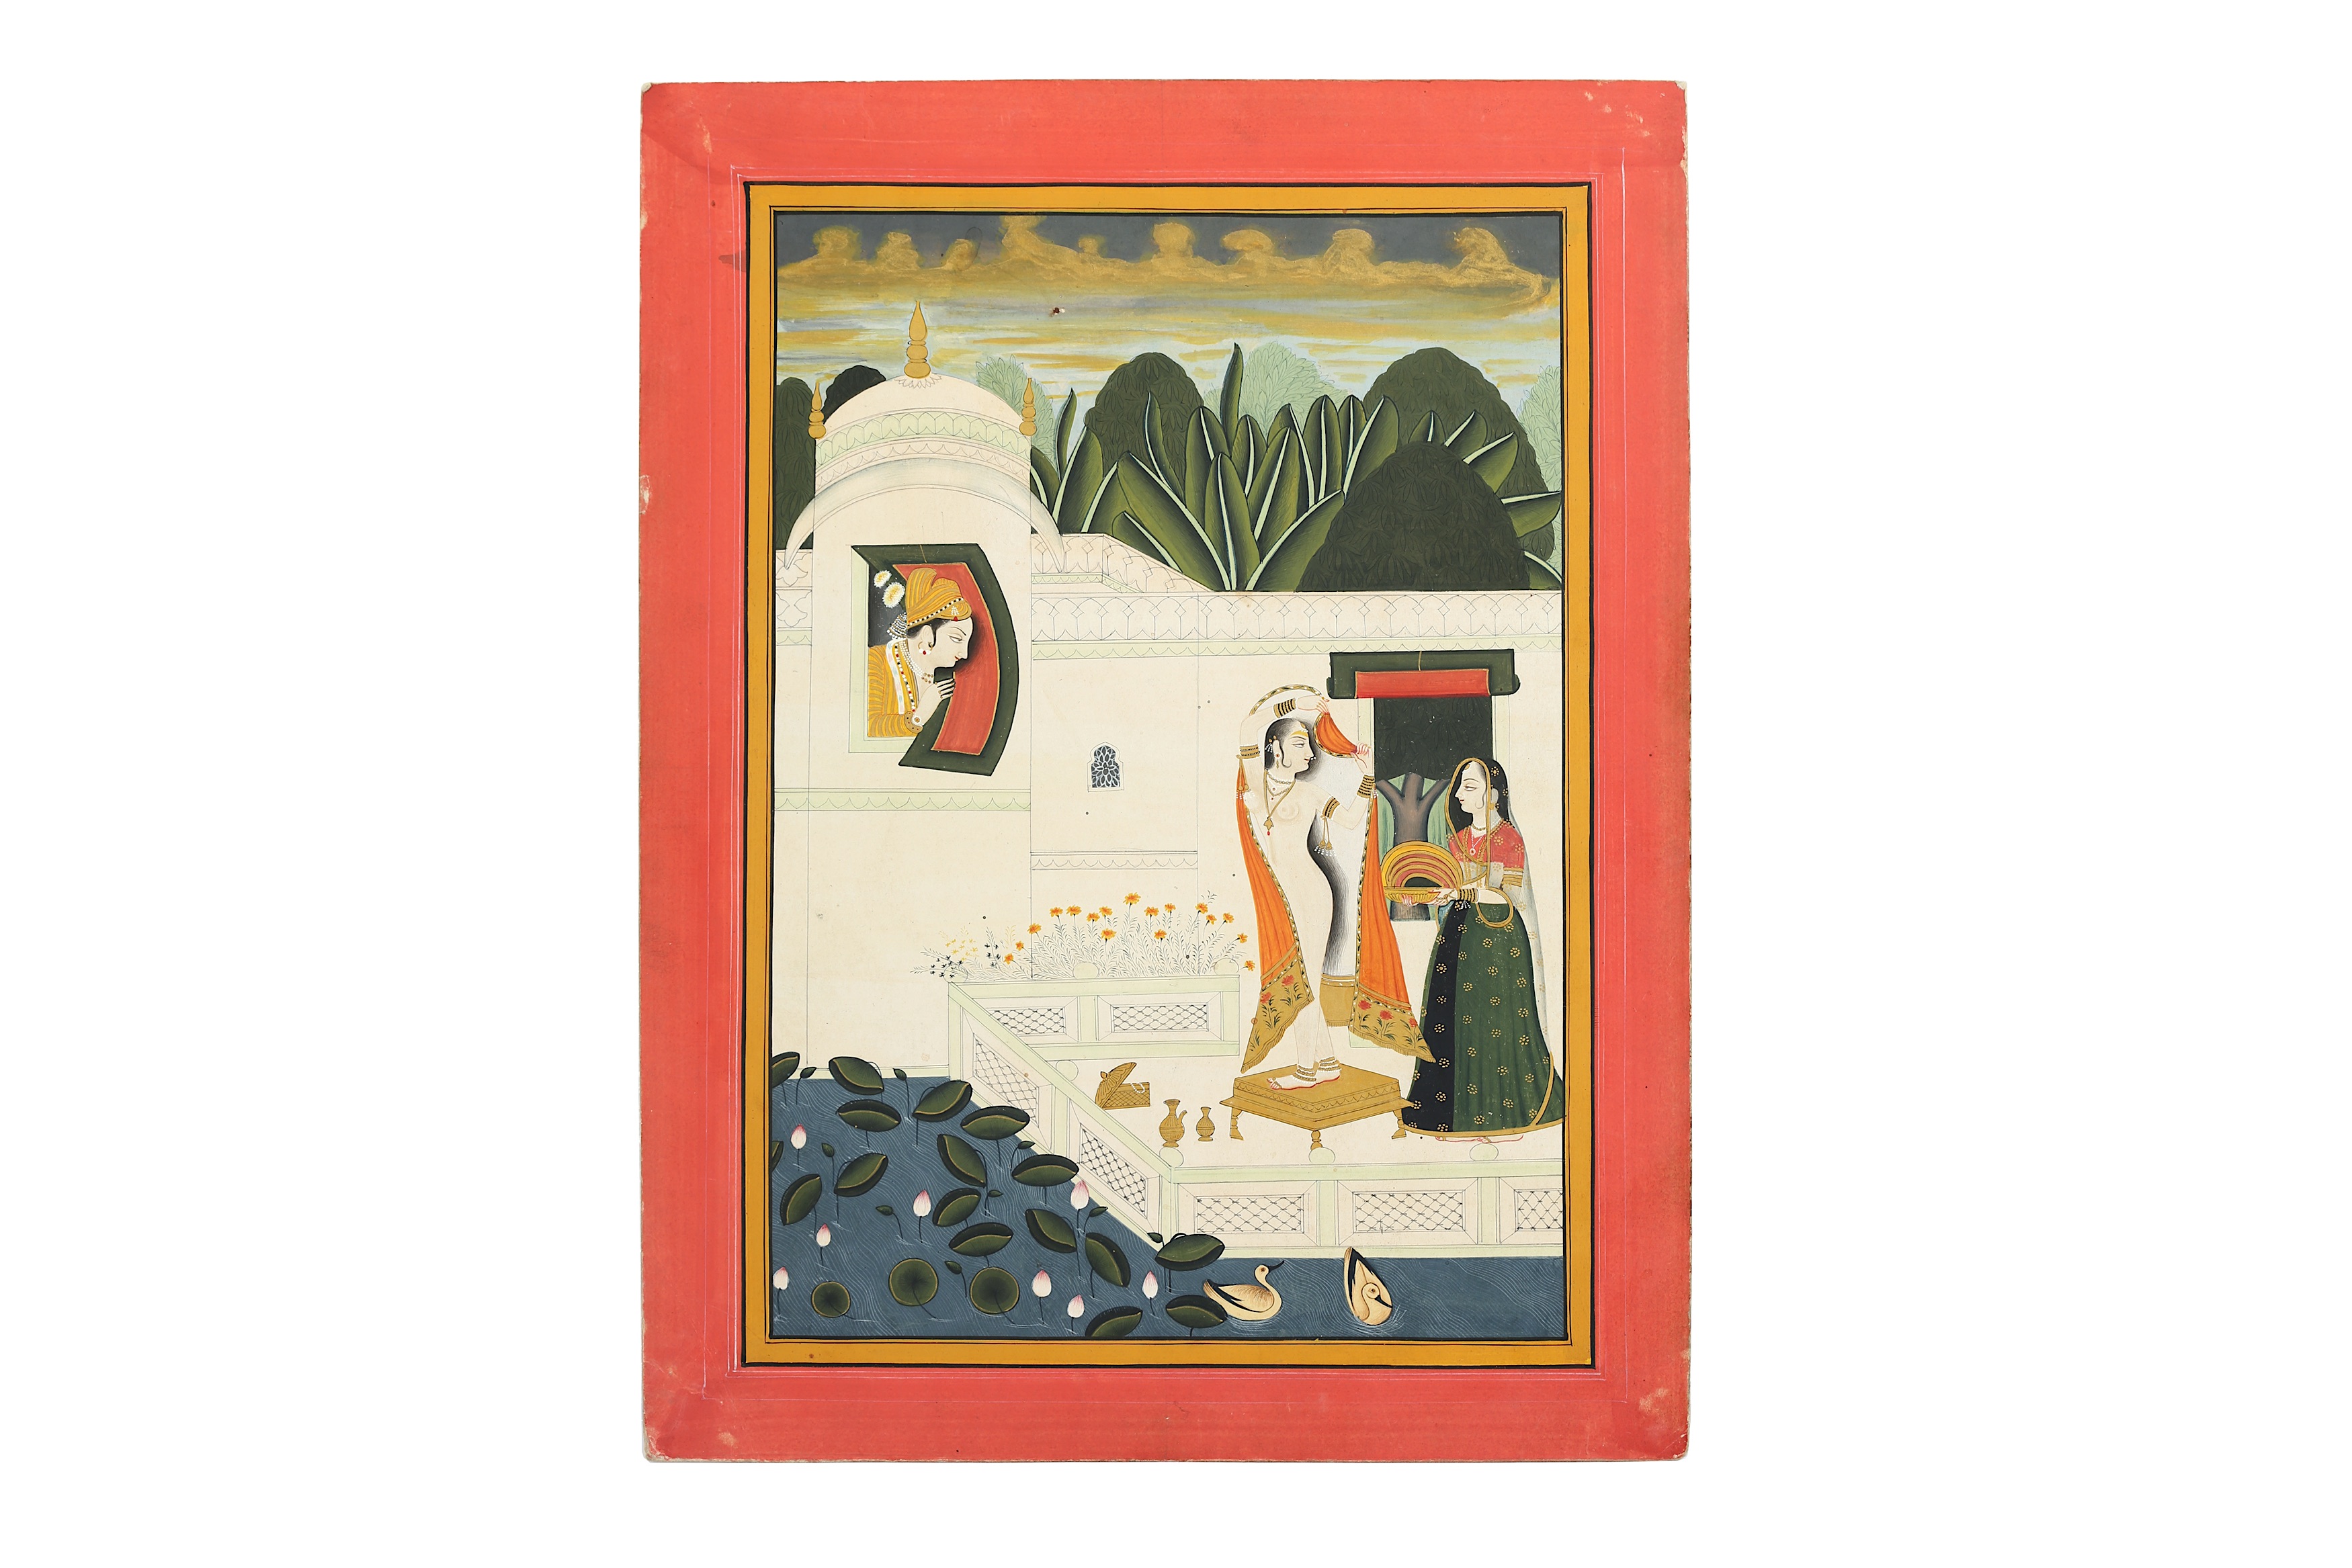 A PAHARI-REVIVAL BATHING SCENE PROPERTY OF THE LATE BRUNO CARUSO (1927 - 2018) COLLECTION